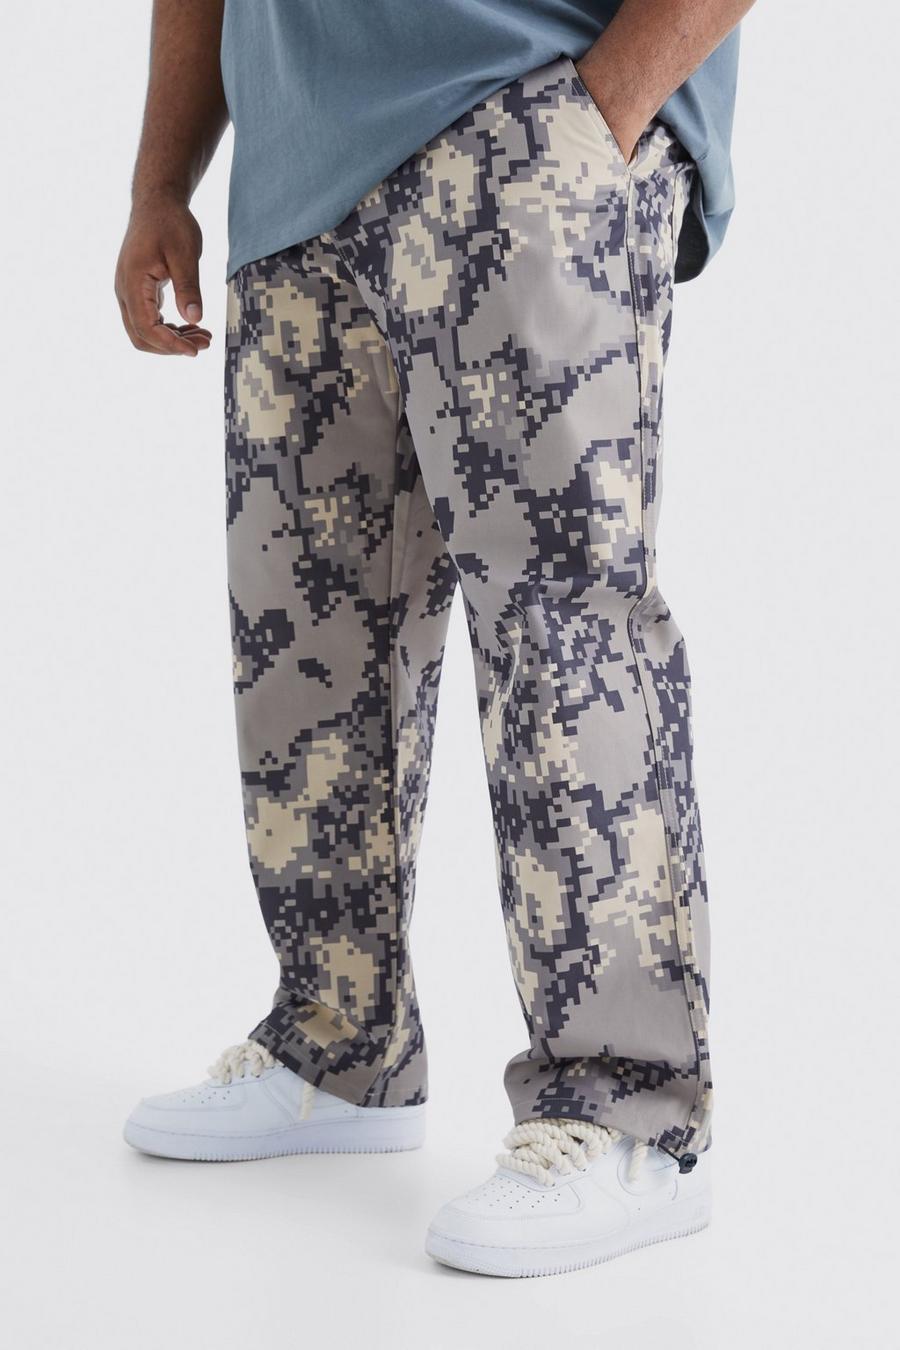 Stone Plus Relaxed Pixelated Camo Pants